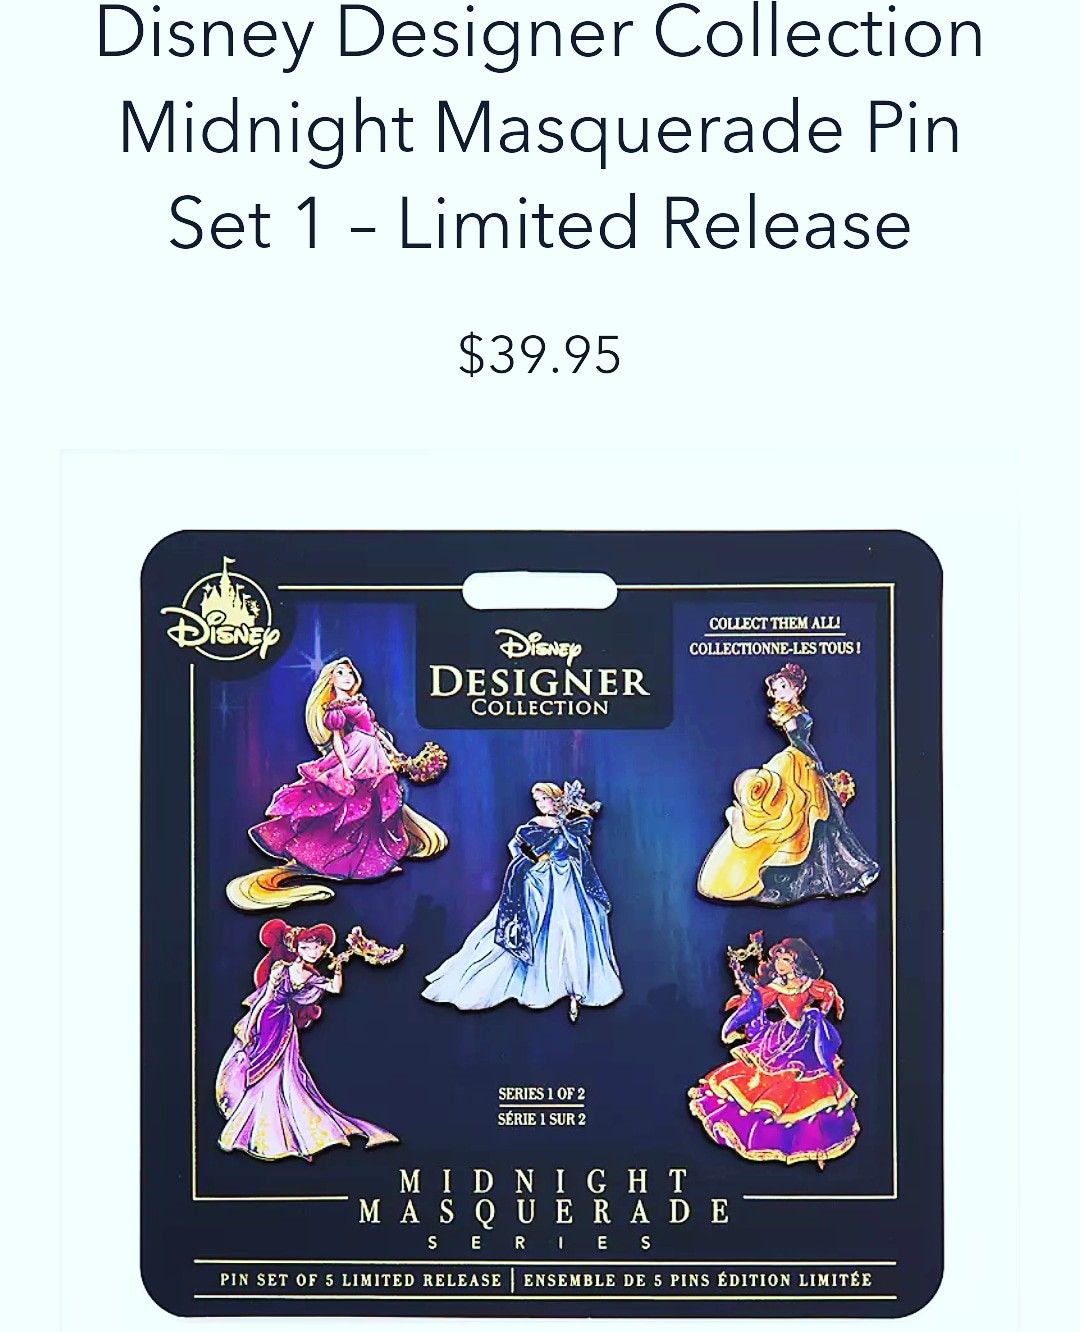 Midnight Masquerade Disney Pin limited collection